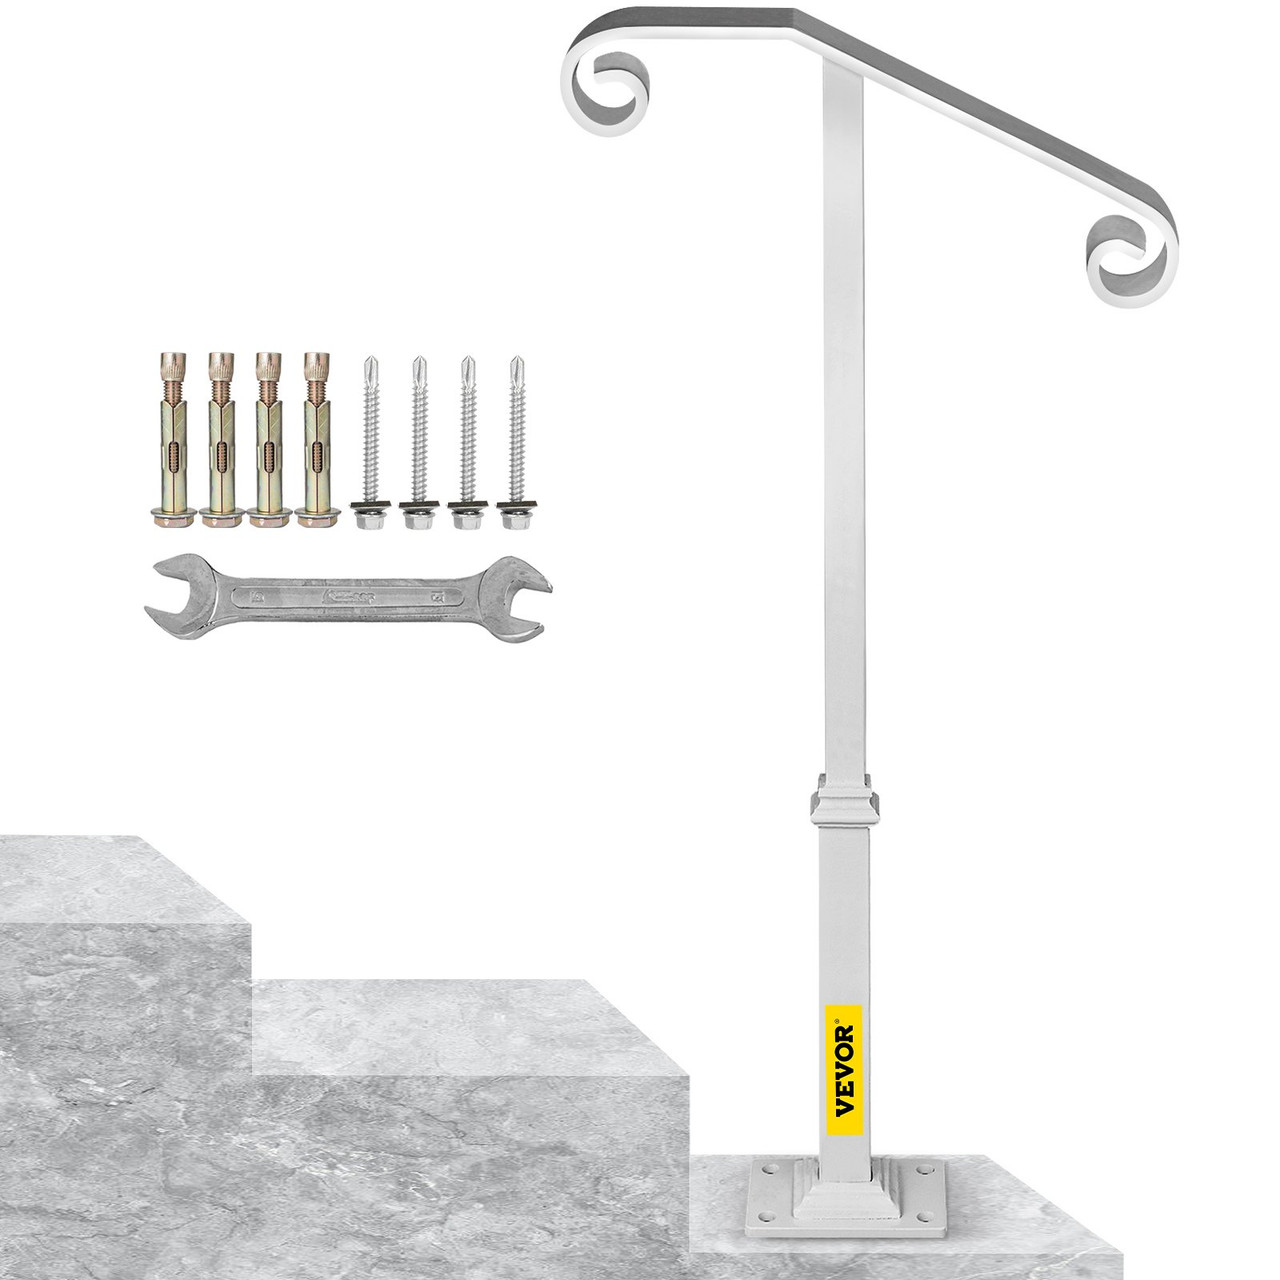 Single Post Handrail White Wrought Iron Post Mount Step Grab Supports Fits 1 or 2 Steps Grab Rail Single Post Railing